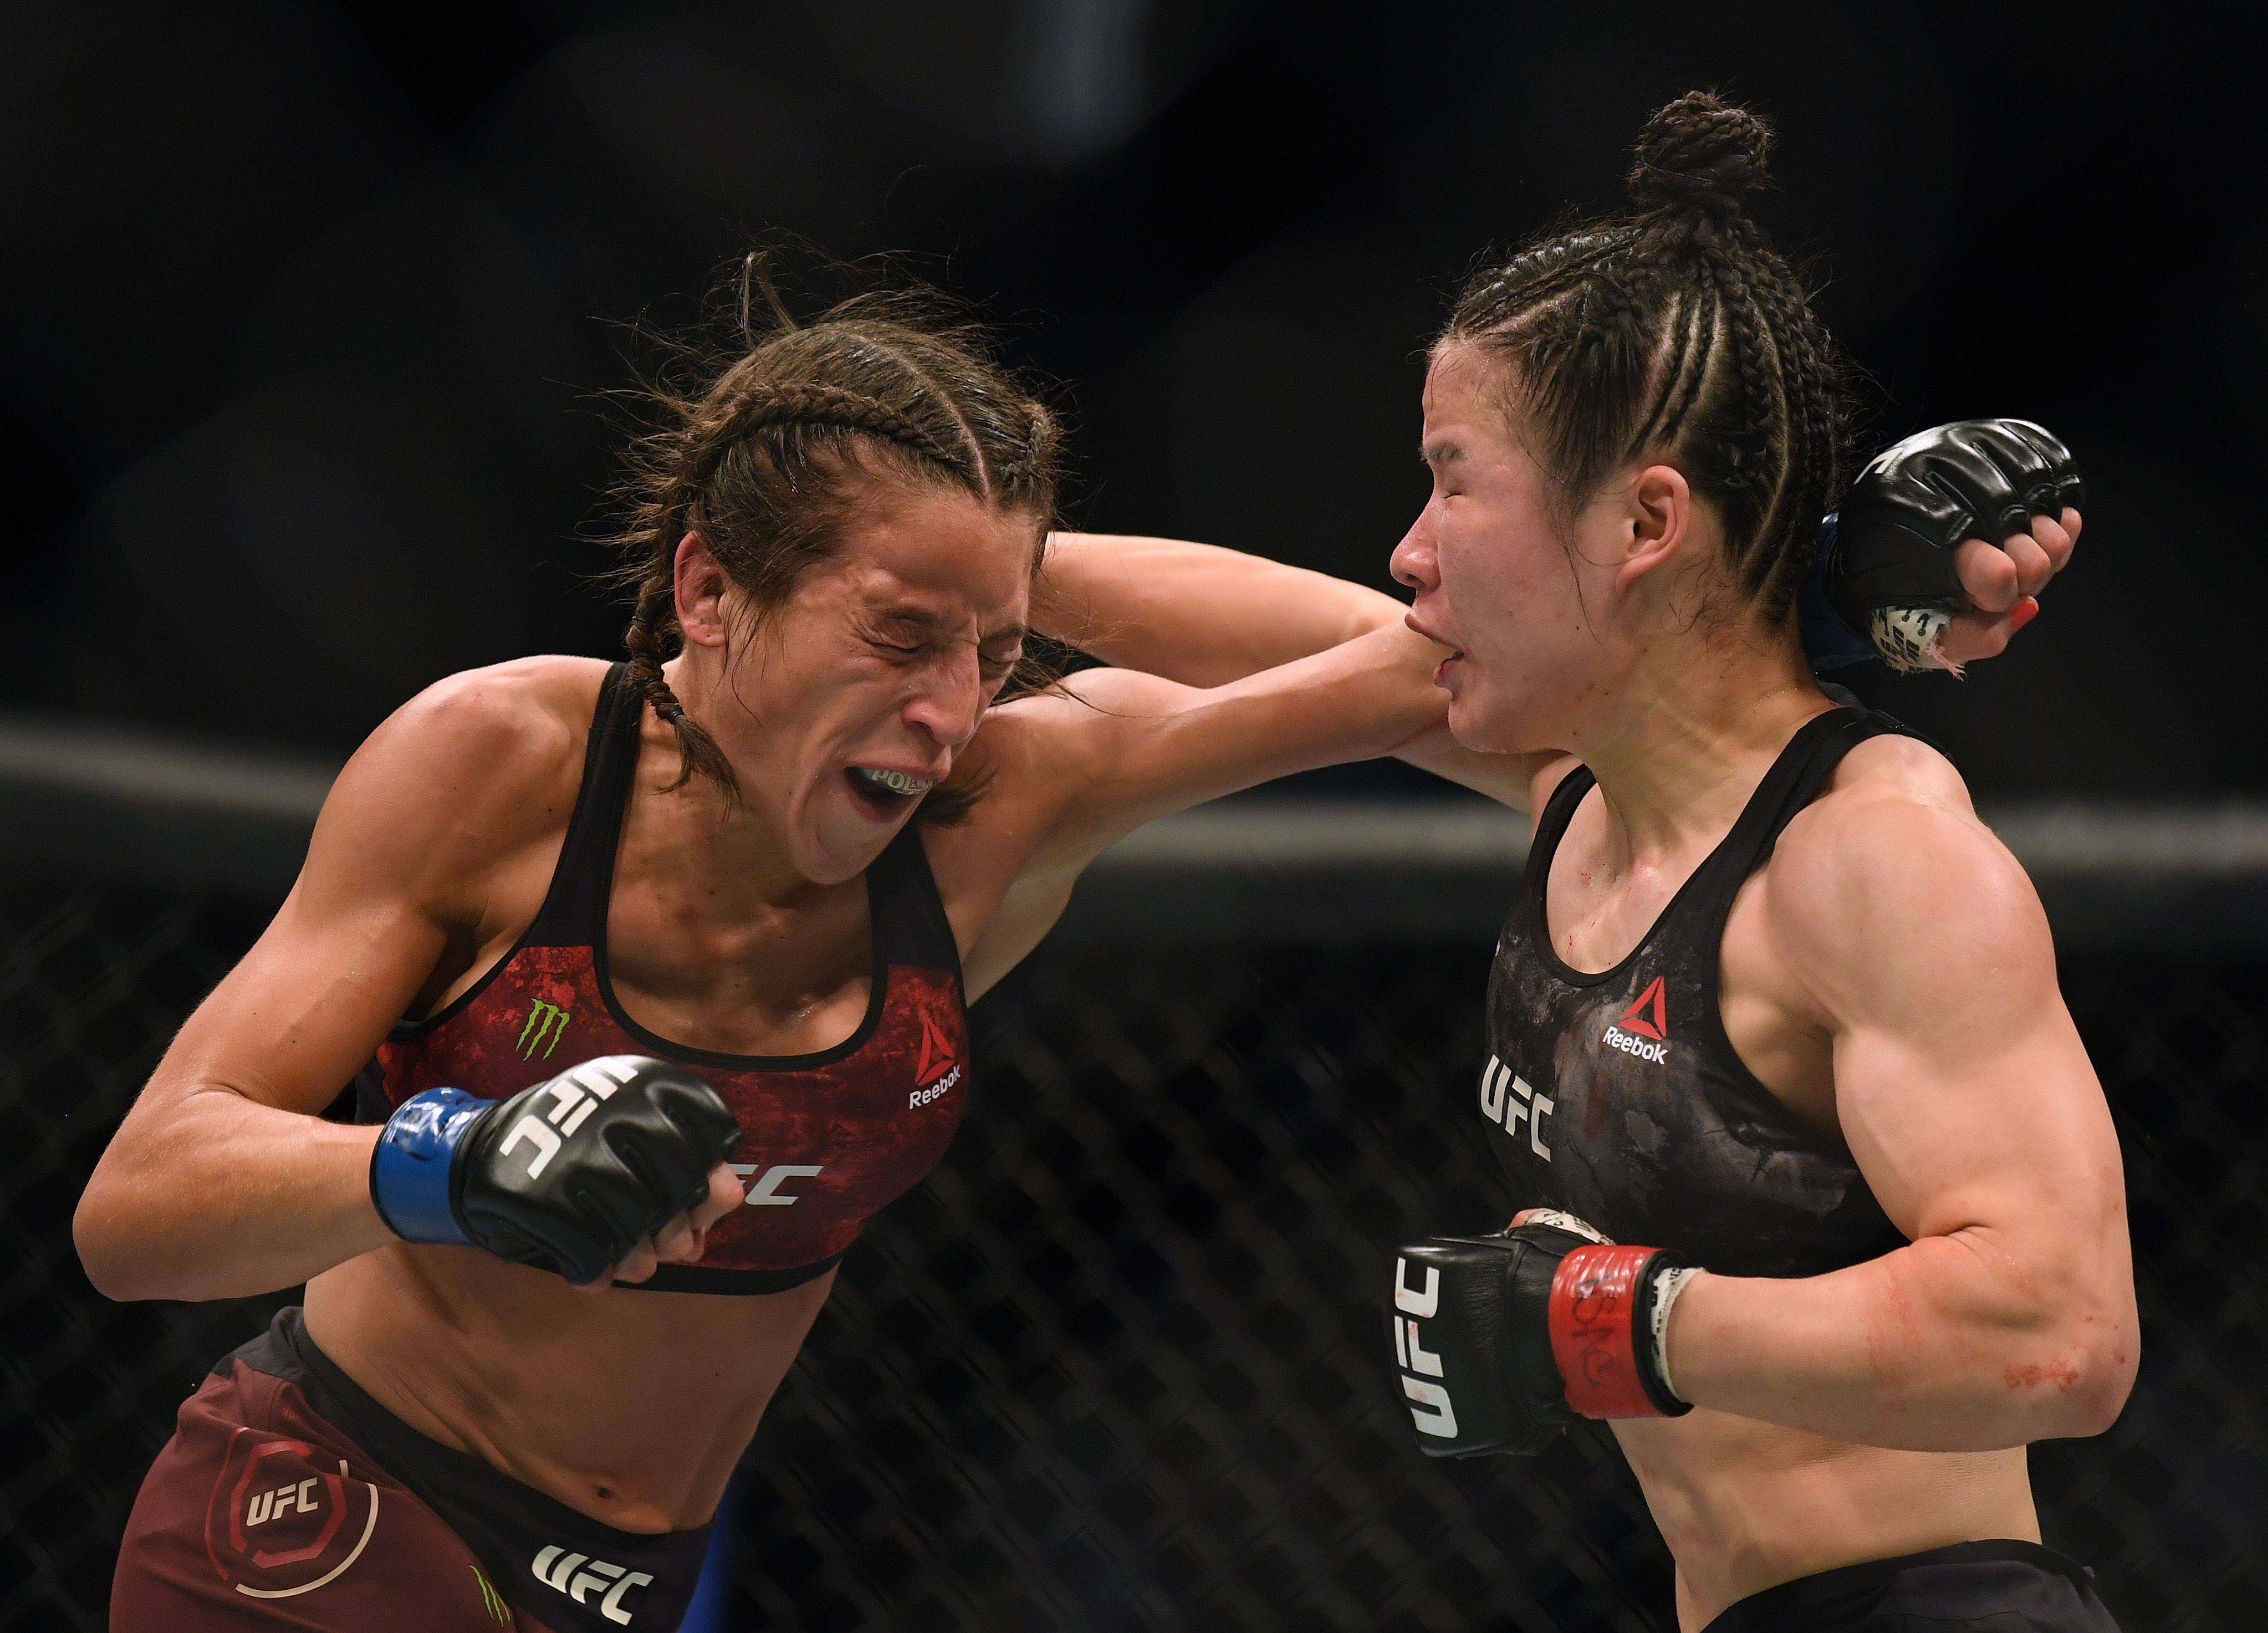 Zhang Weili (right) battles against Joanna Jedrzejczyk en route to a split decision win at T-Mobile Arena on March 7, 2020 in Las Vegas, Nevada. Photo: Harry How/Getty Images/AFP